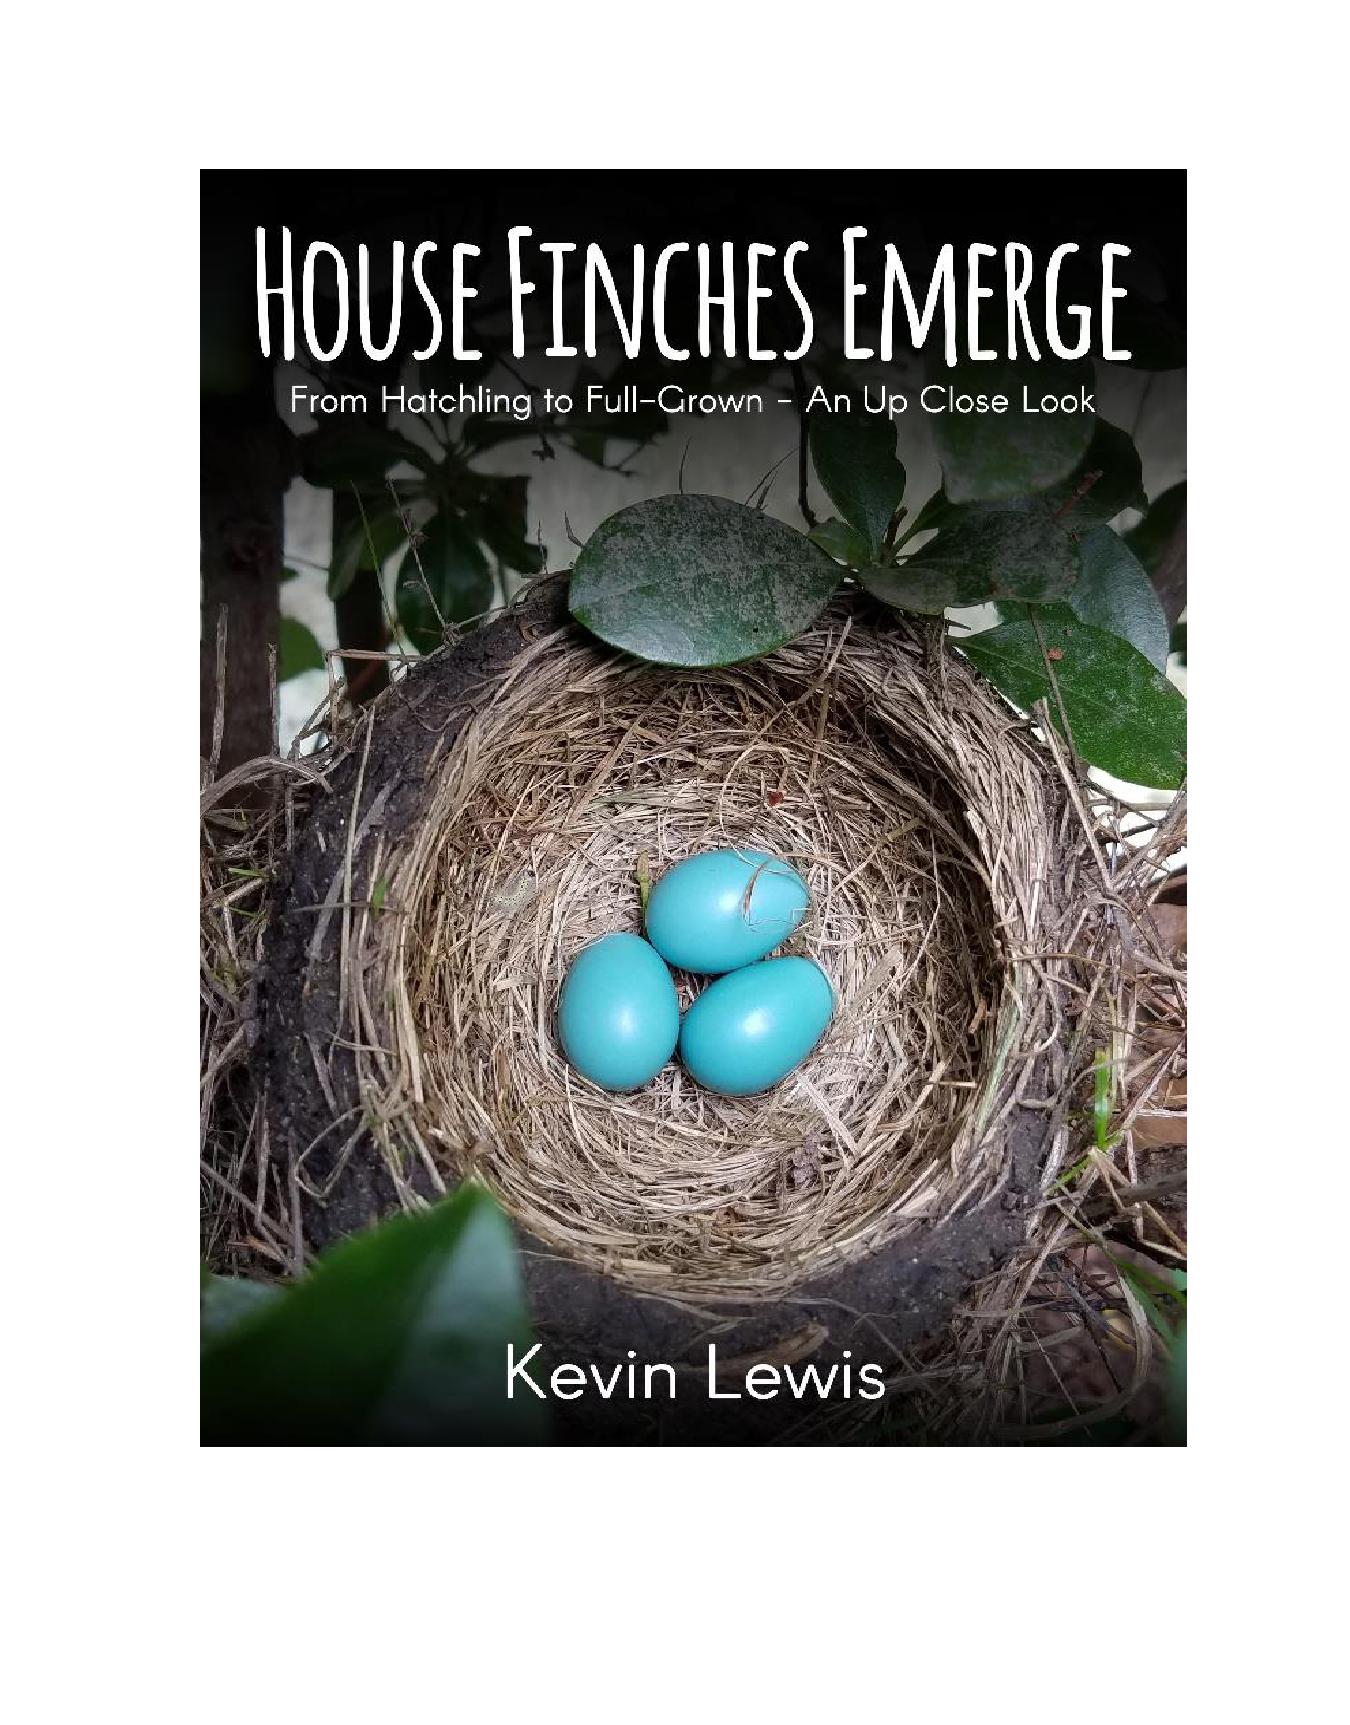 FREE: House Finches Emerge: From Hatchling to Full-Grown – An Up-Close Look by Kevin Lewis